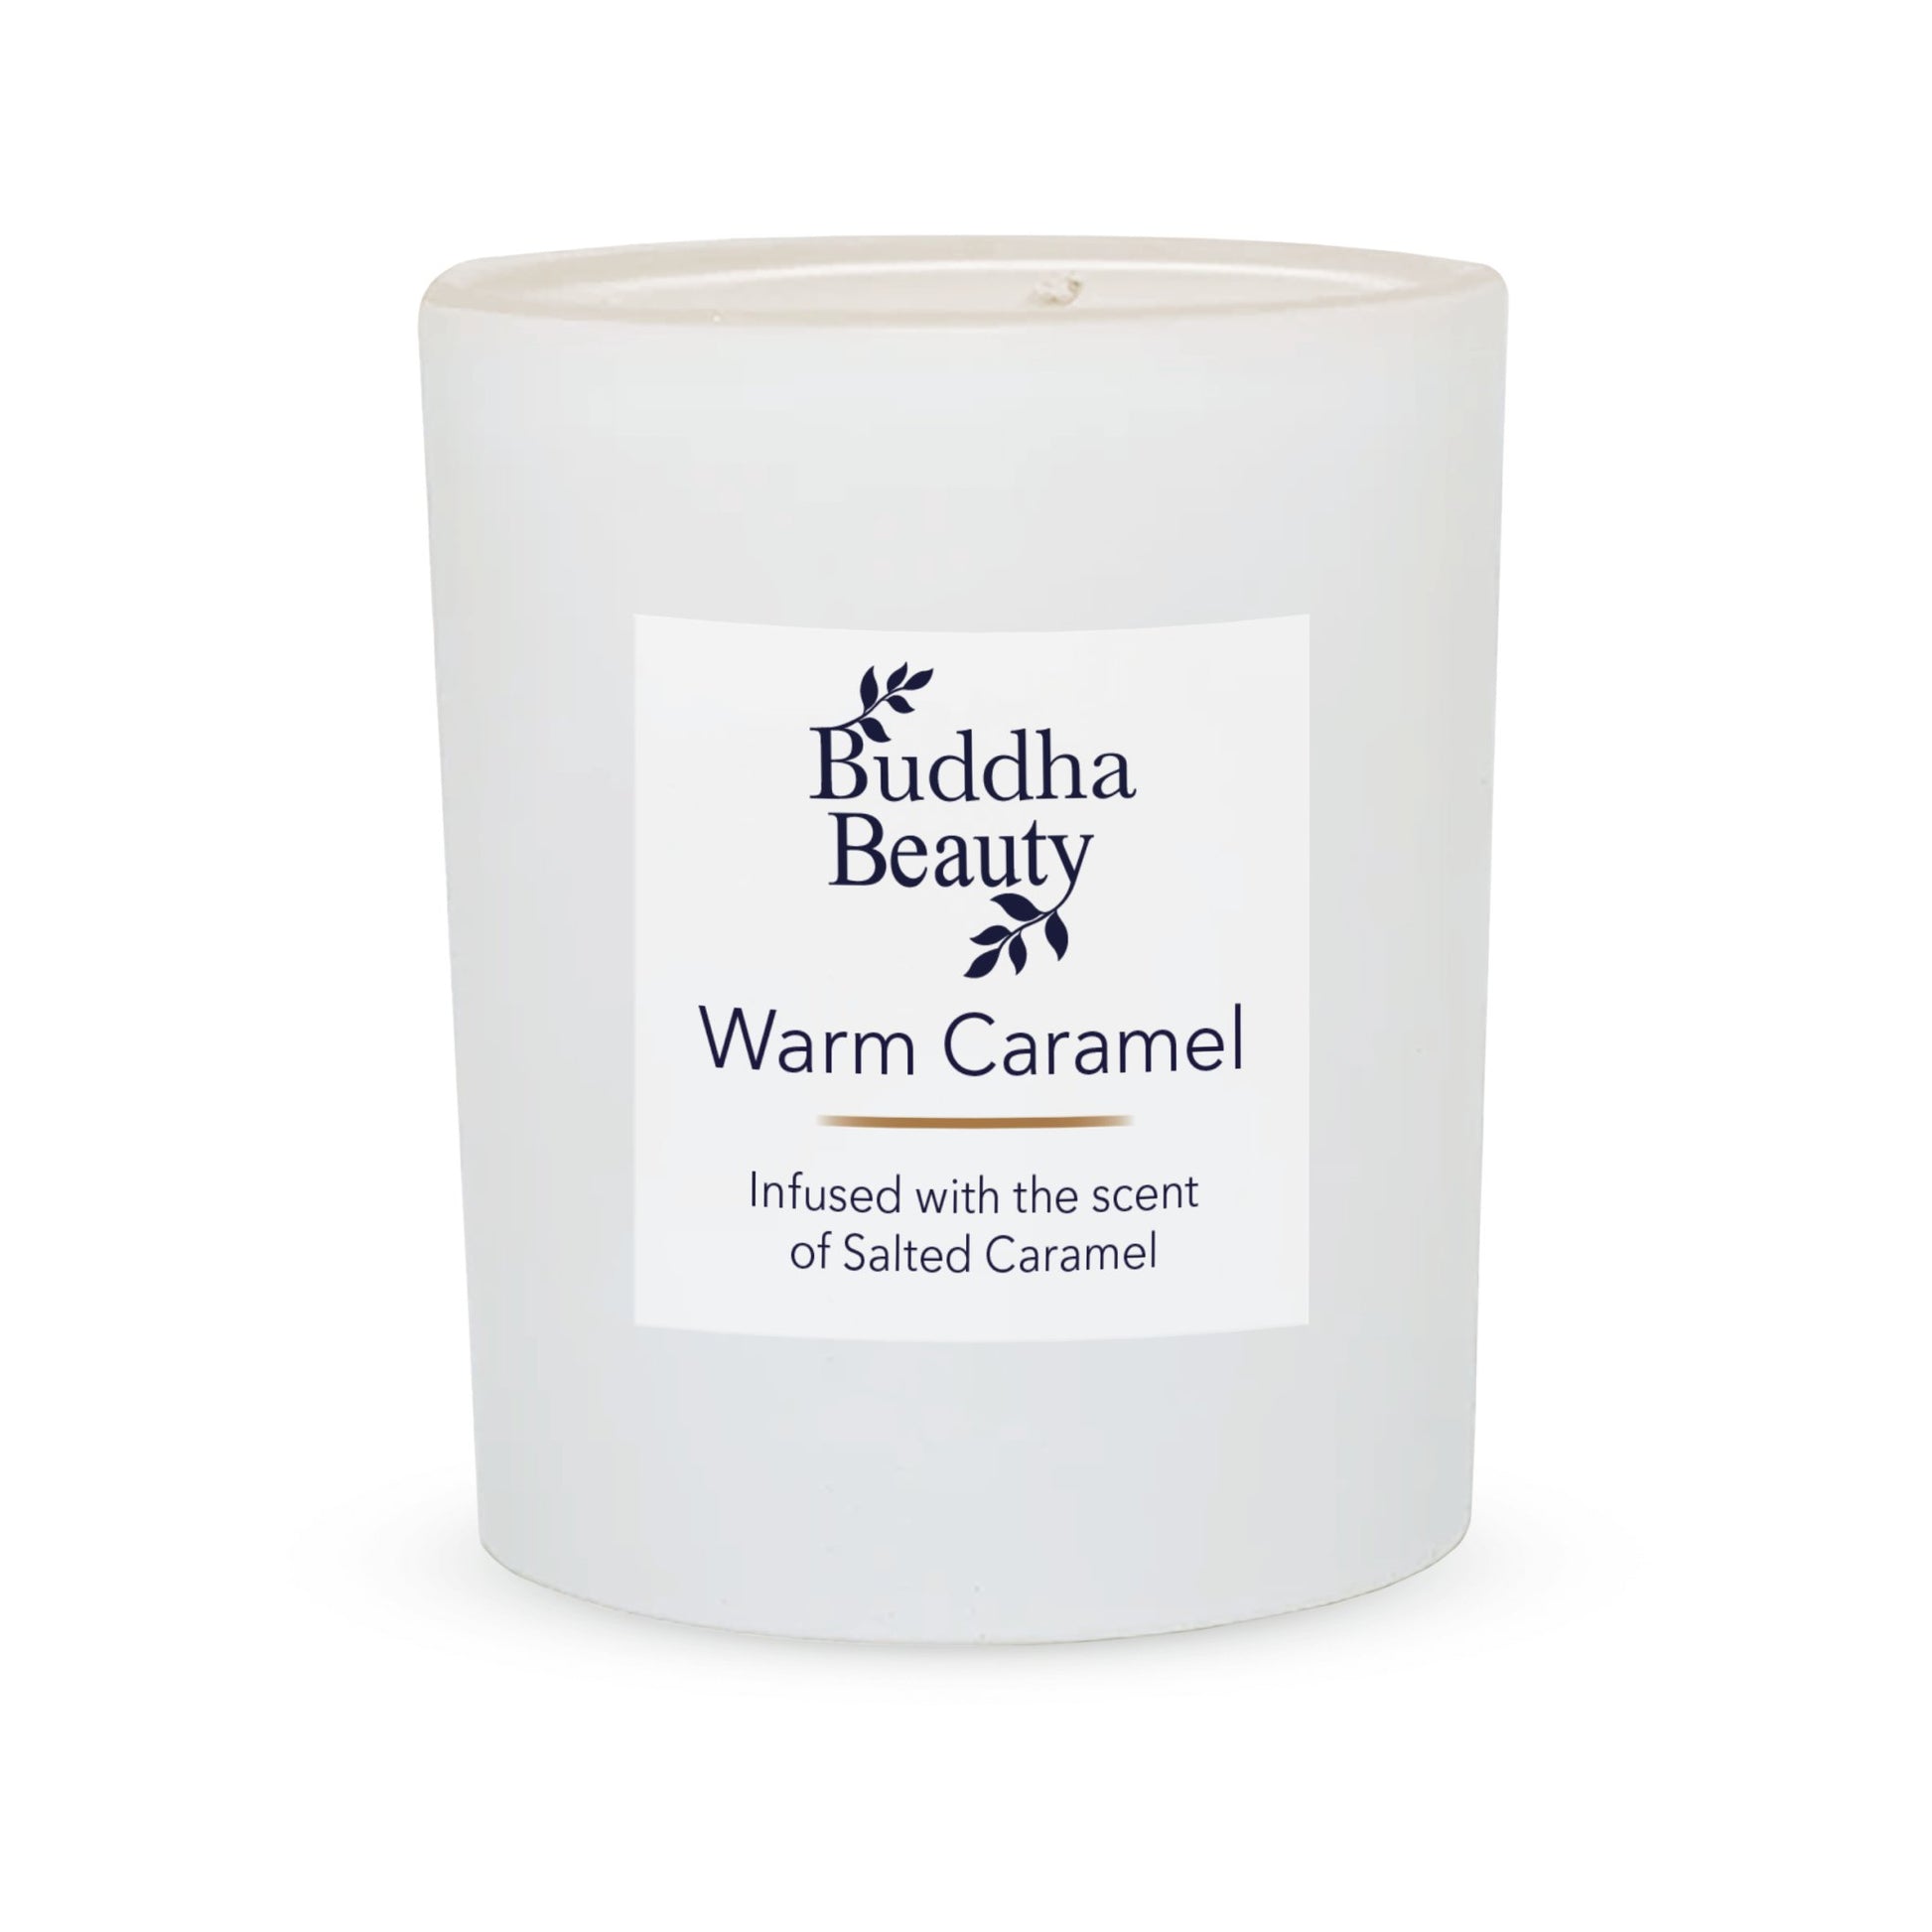 Warm Caramel Room Fragrance Collection - Buddha Beauty Skincare Room Candle #vegan# #cruelty-free# #skincare#